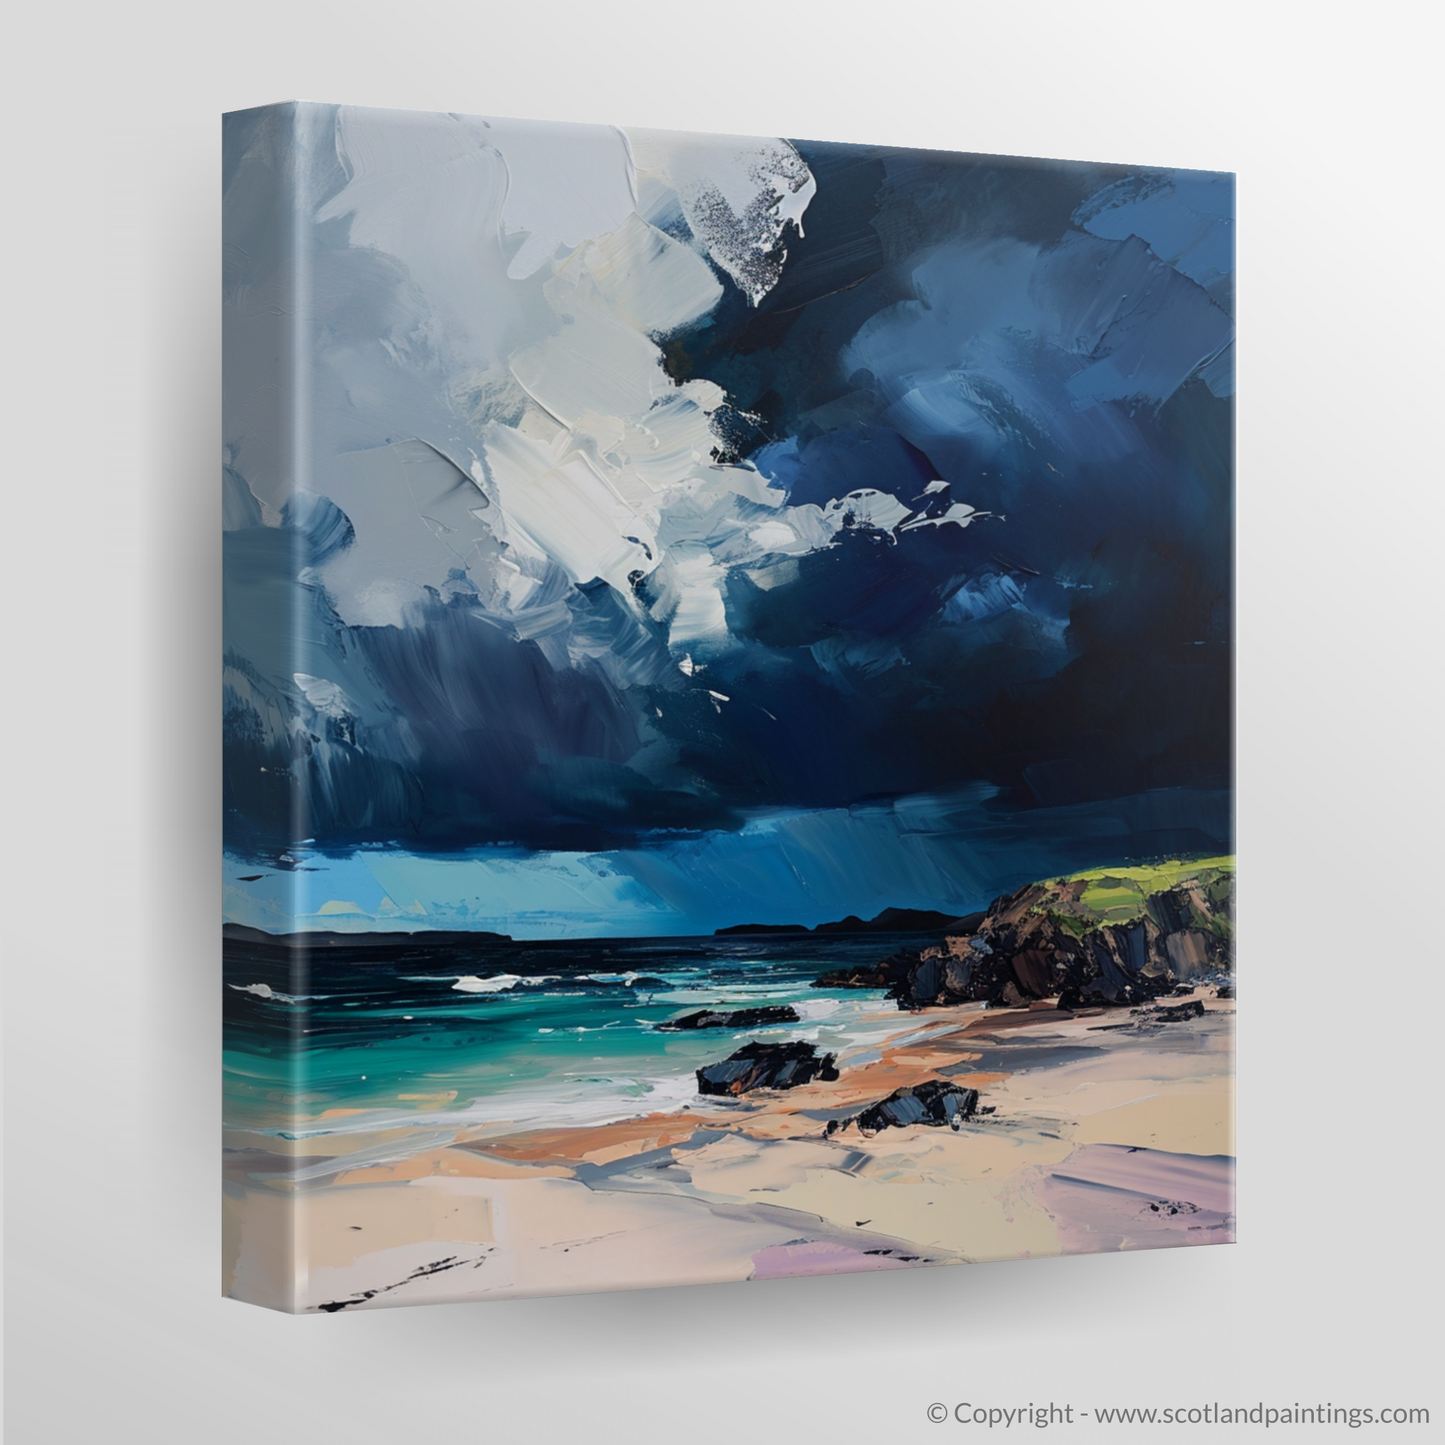 Canvas Print of Balnakeil Bay with a stormy sky